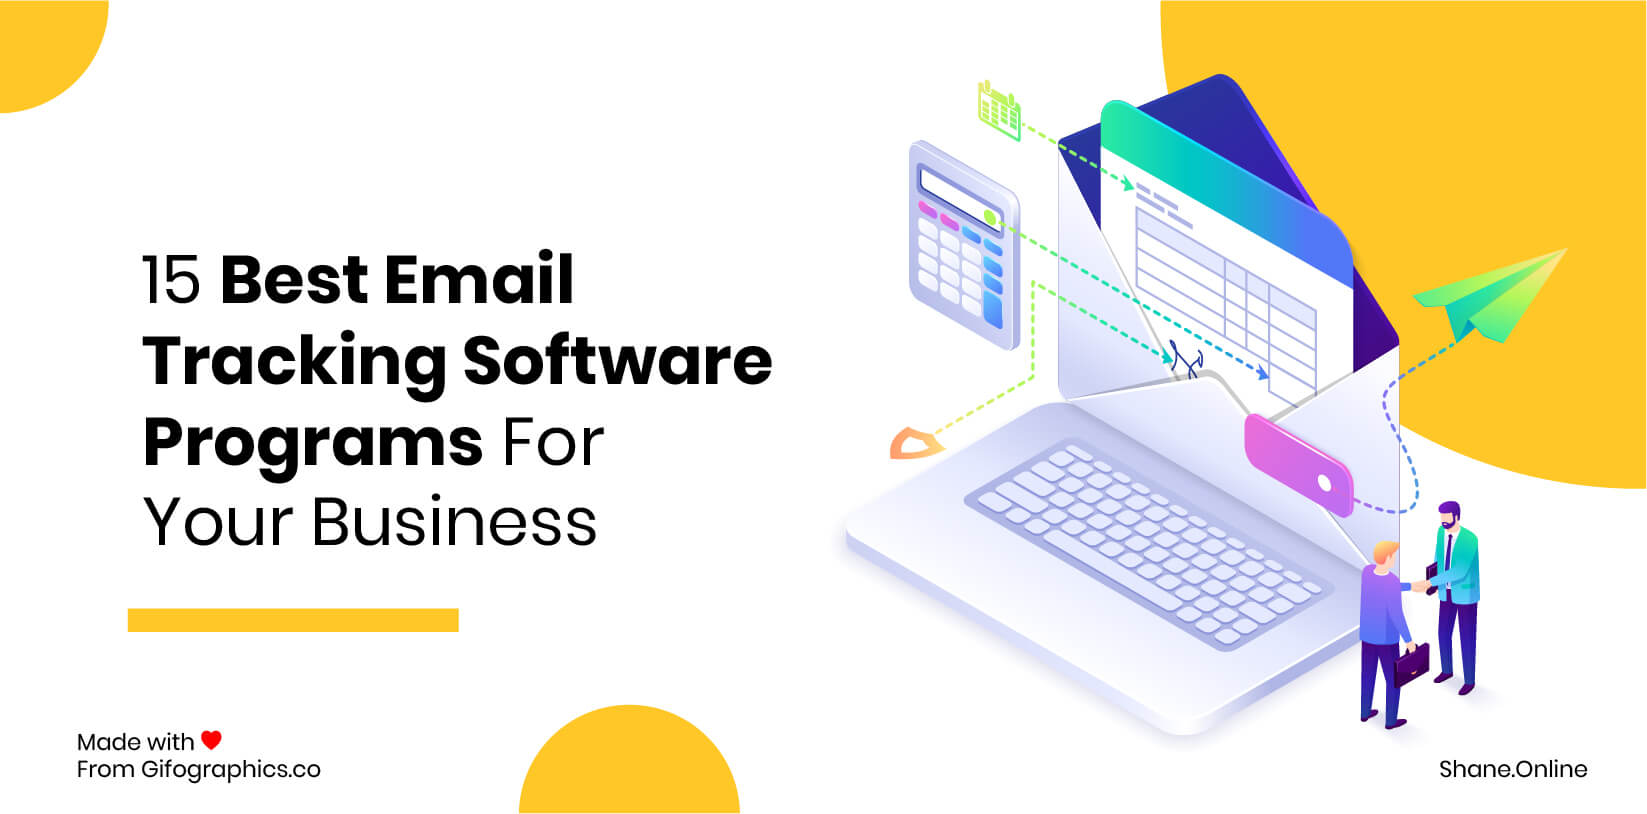 15 Best Email Tracking Software Programs For Your Business